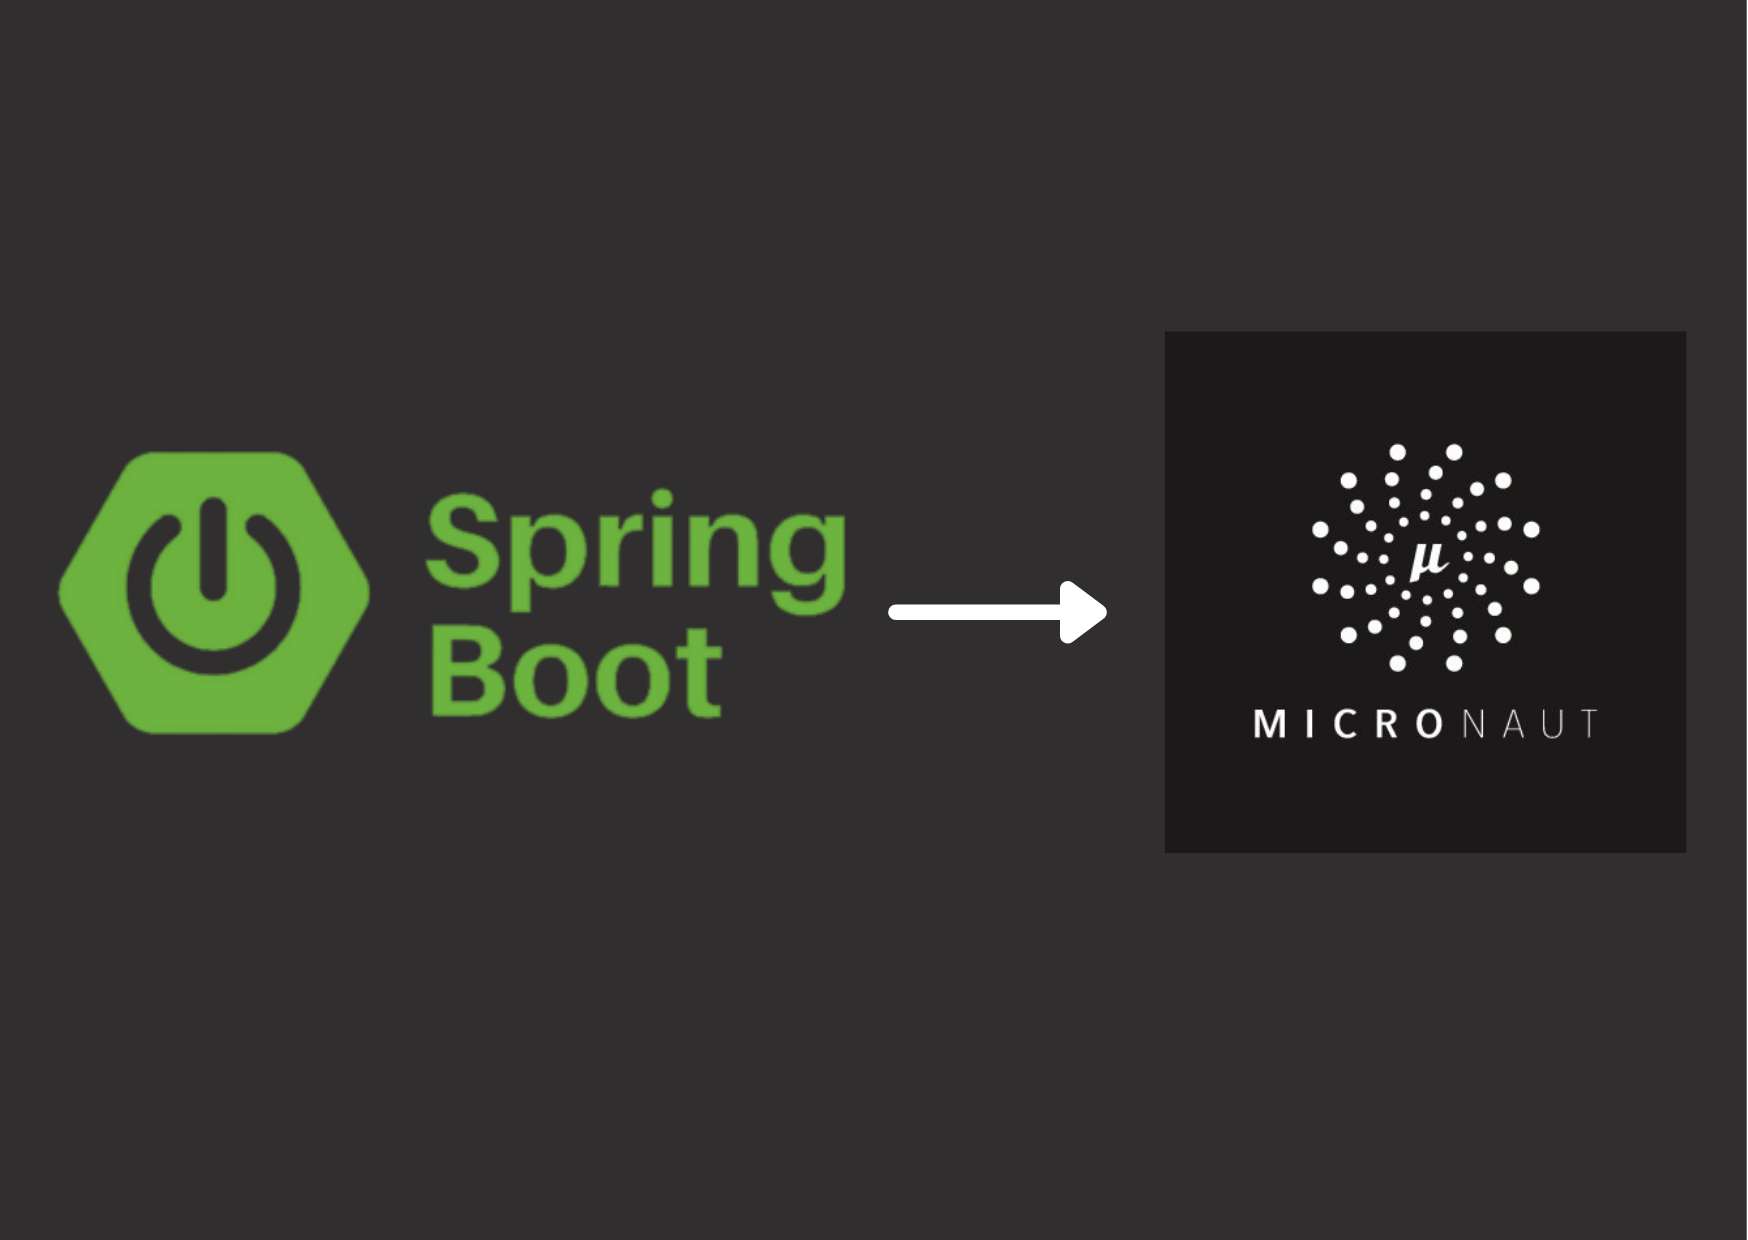 A SpringBoot Developer's Guide To Micronaut